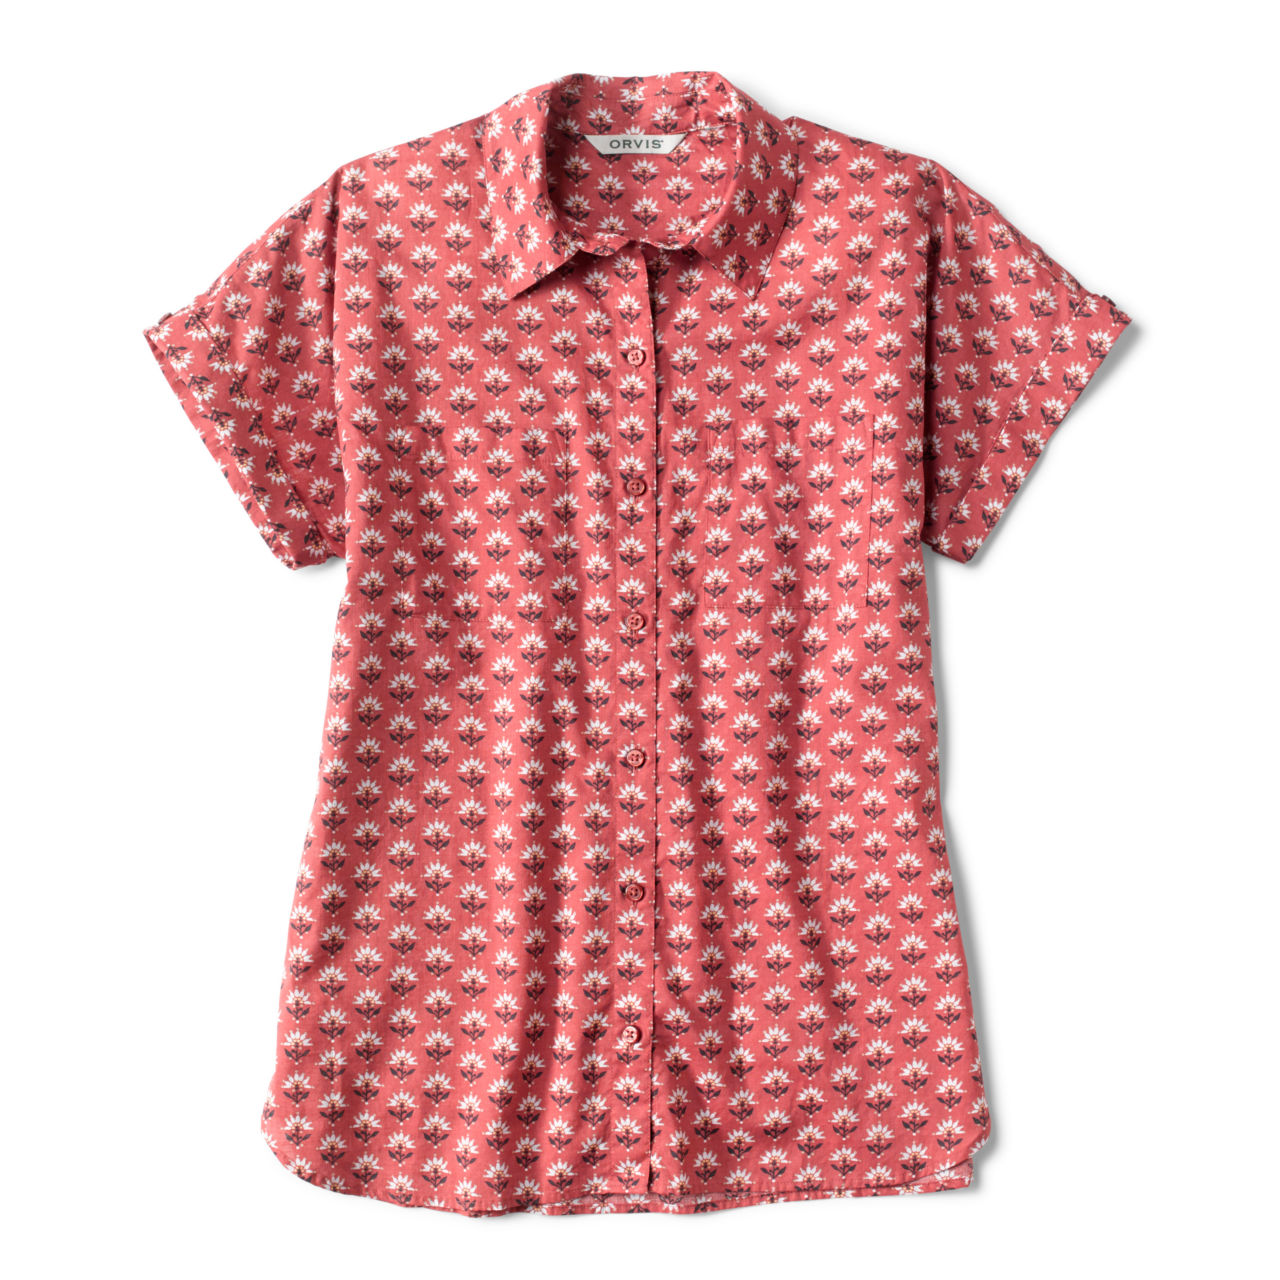 Easy Printed Short-Sleeved Camp Shirt - FADED RED WOODBLOCK FLORAL image number 2